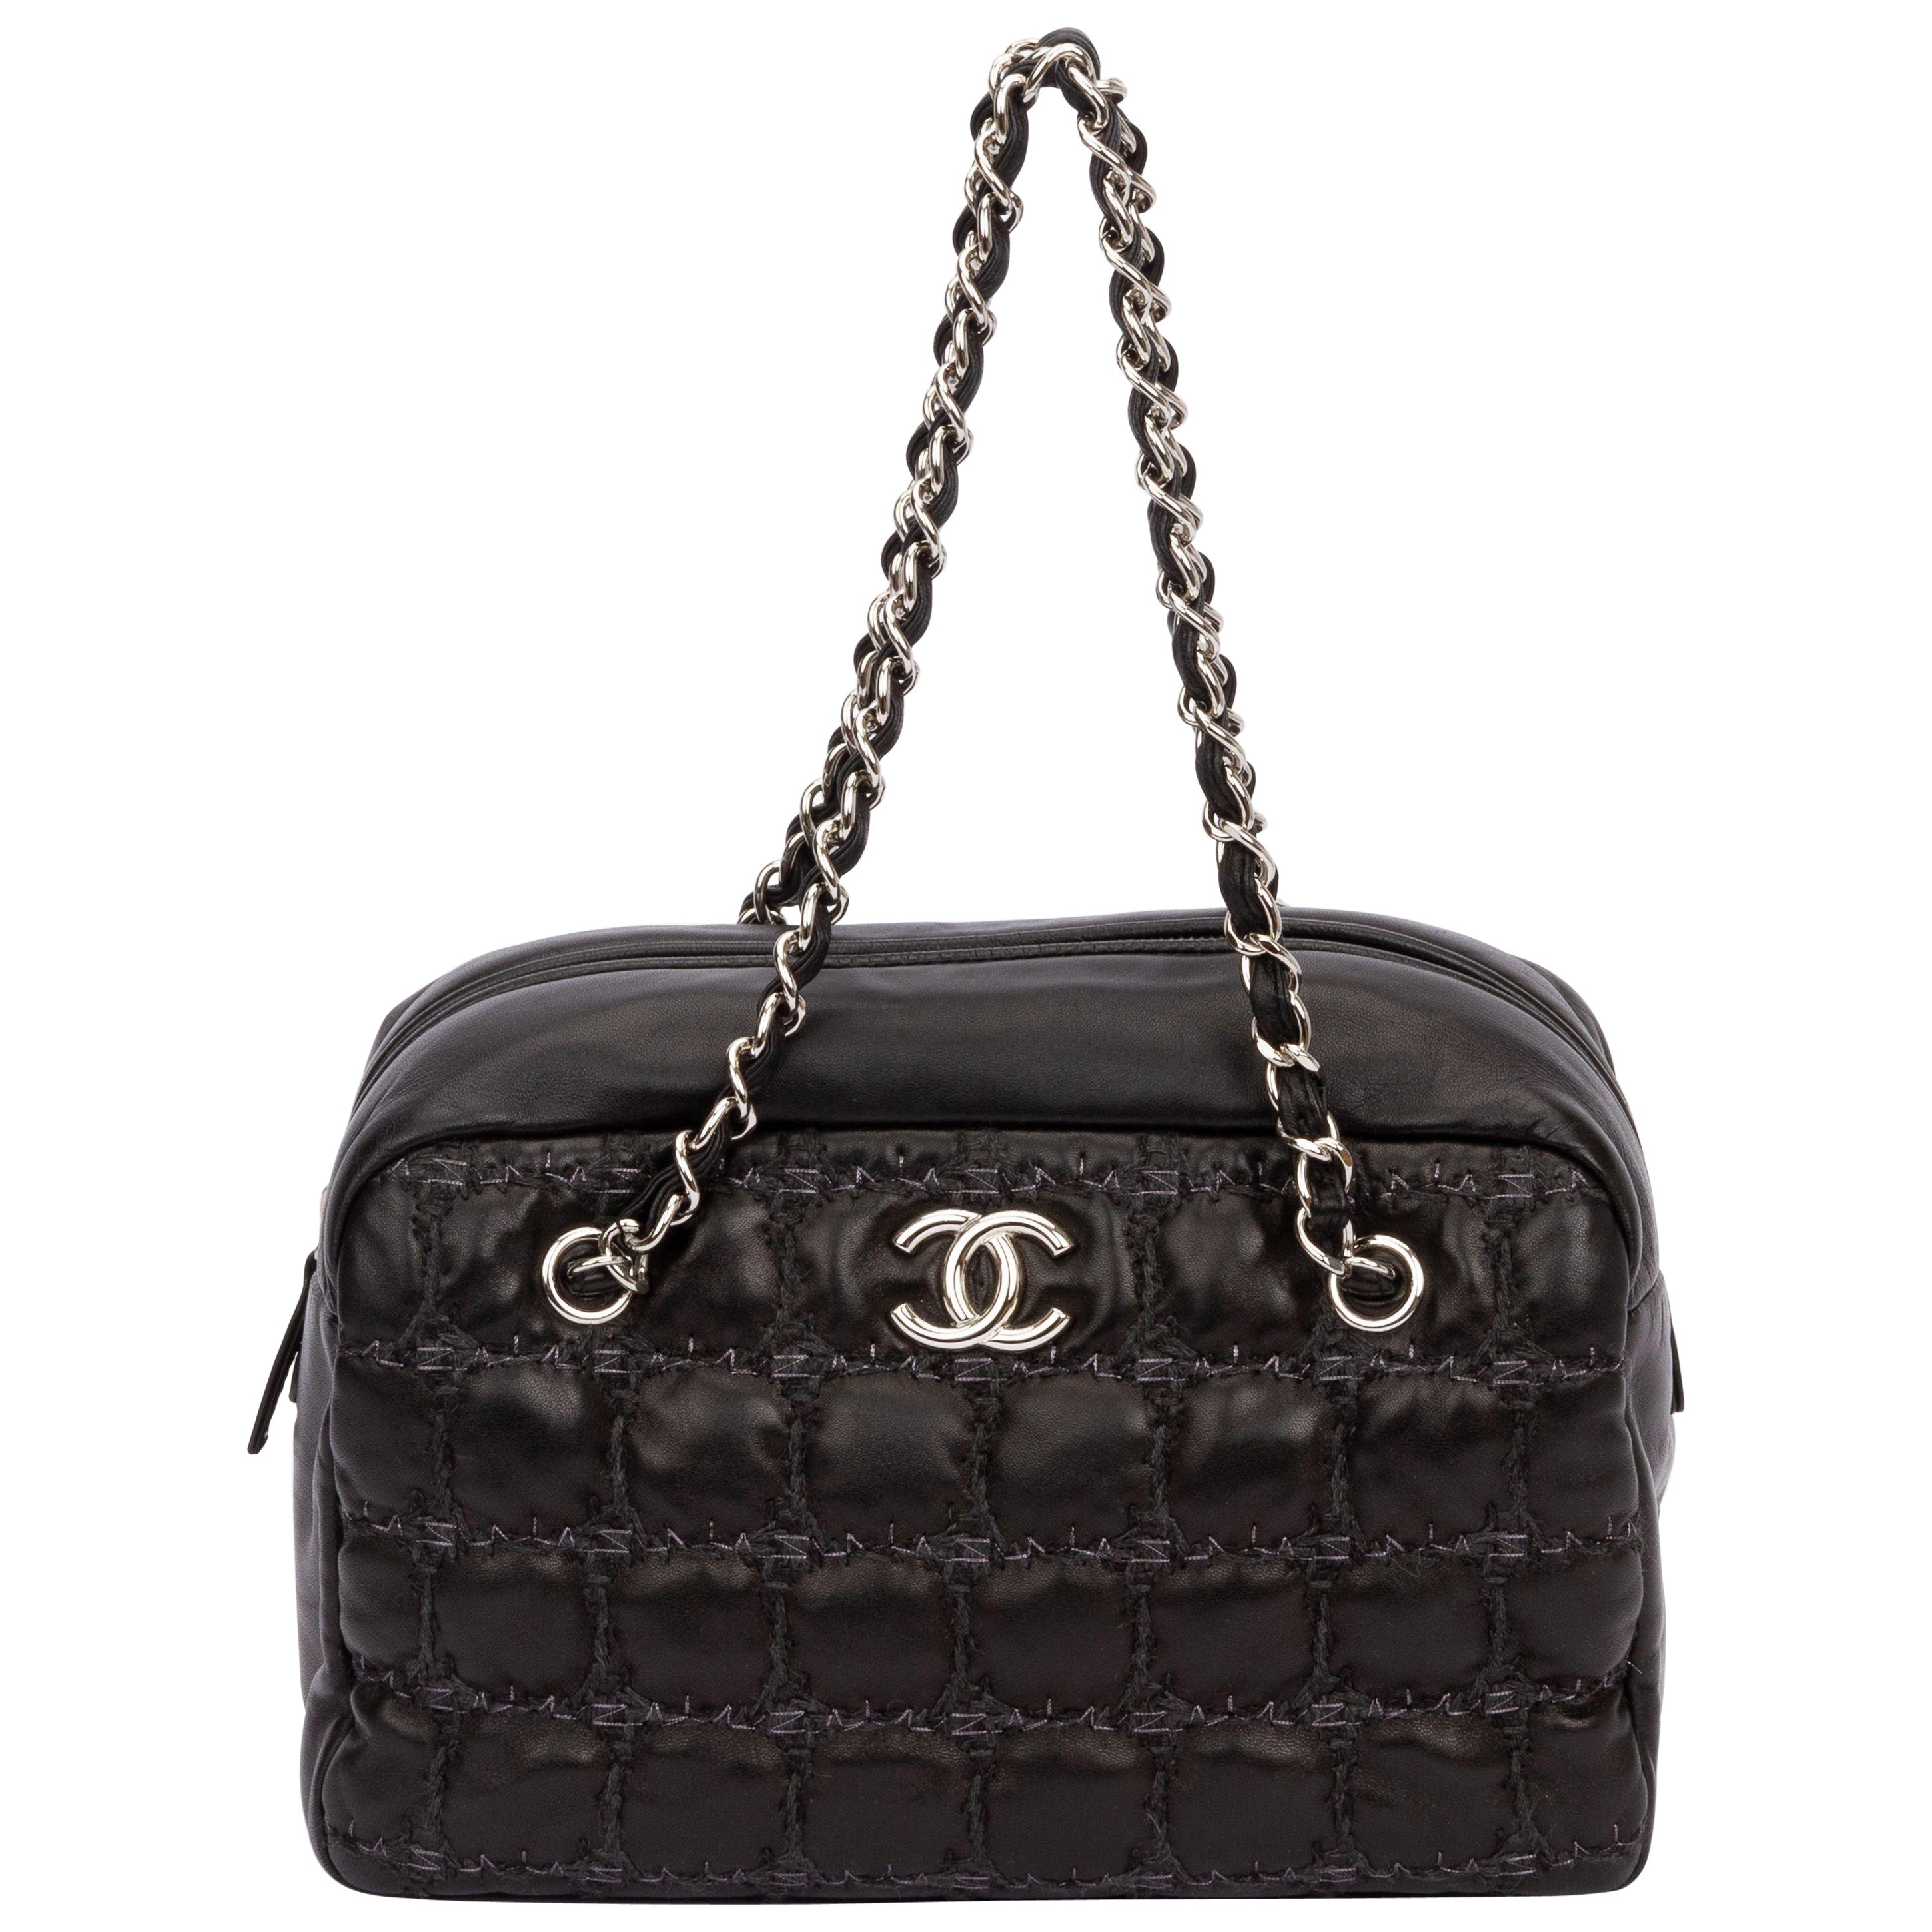 Chanel Tweed On Square Stitch Bubble Bag